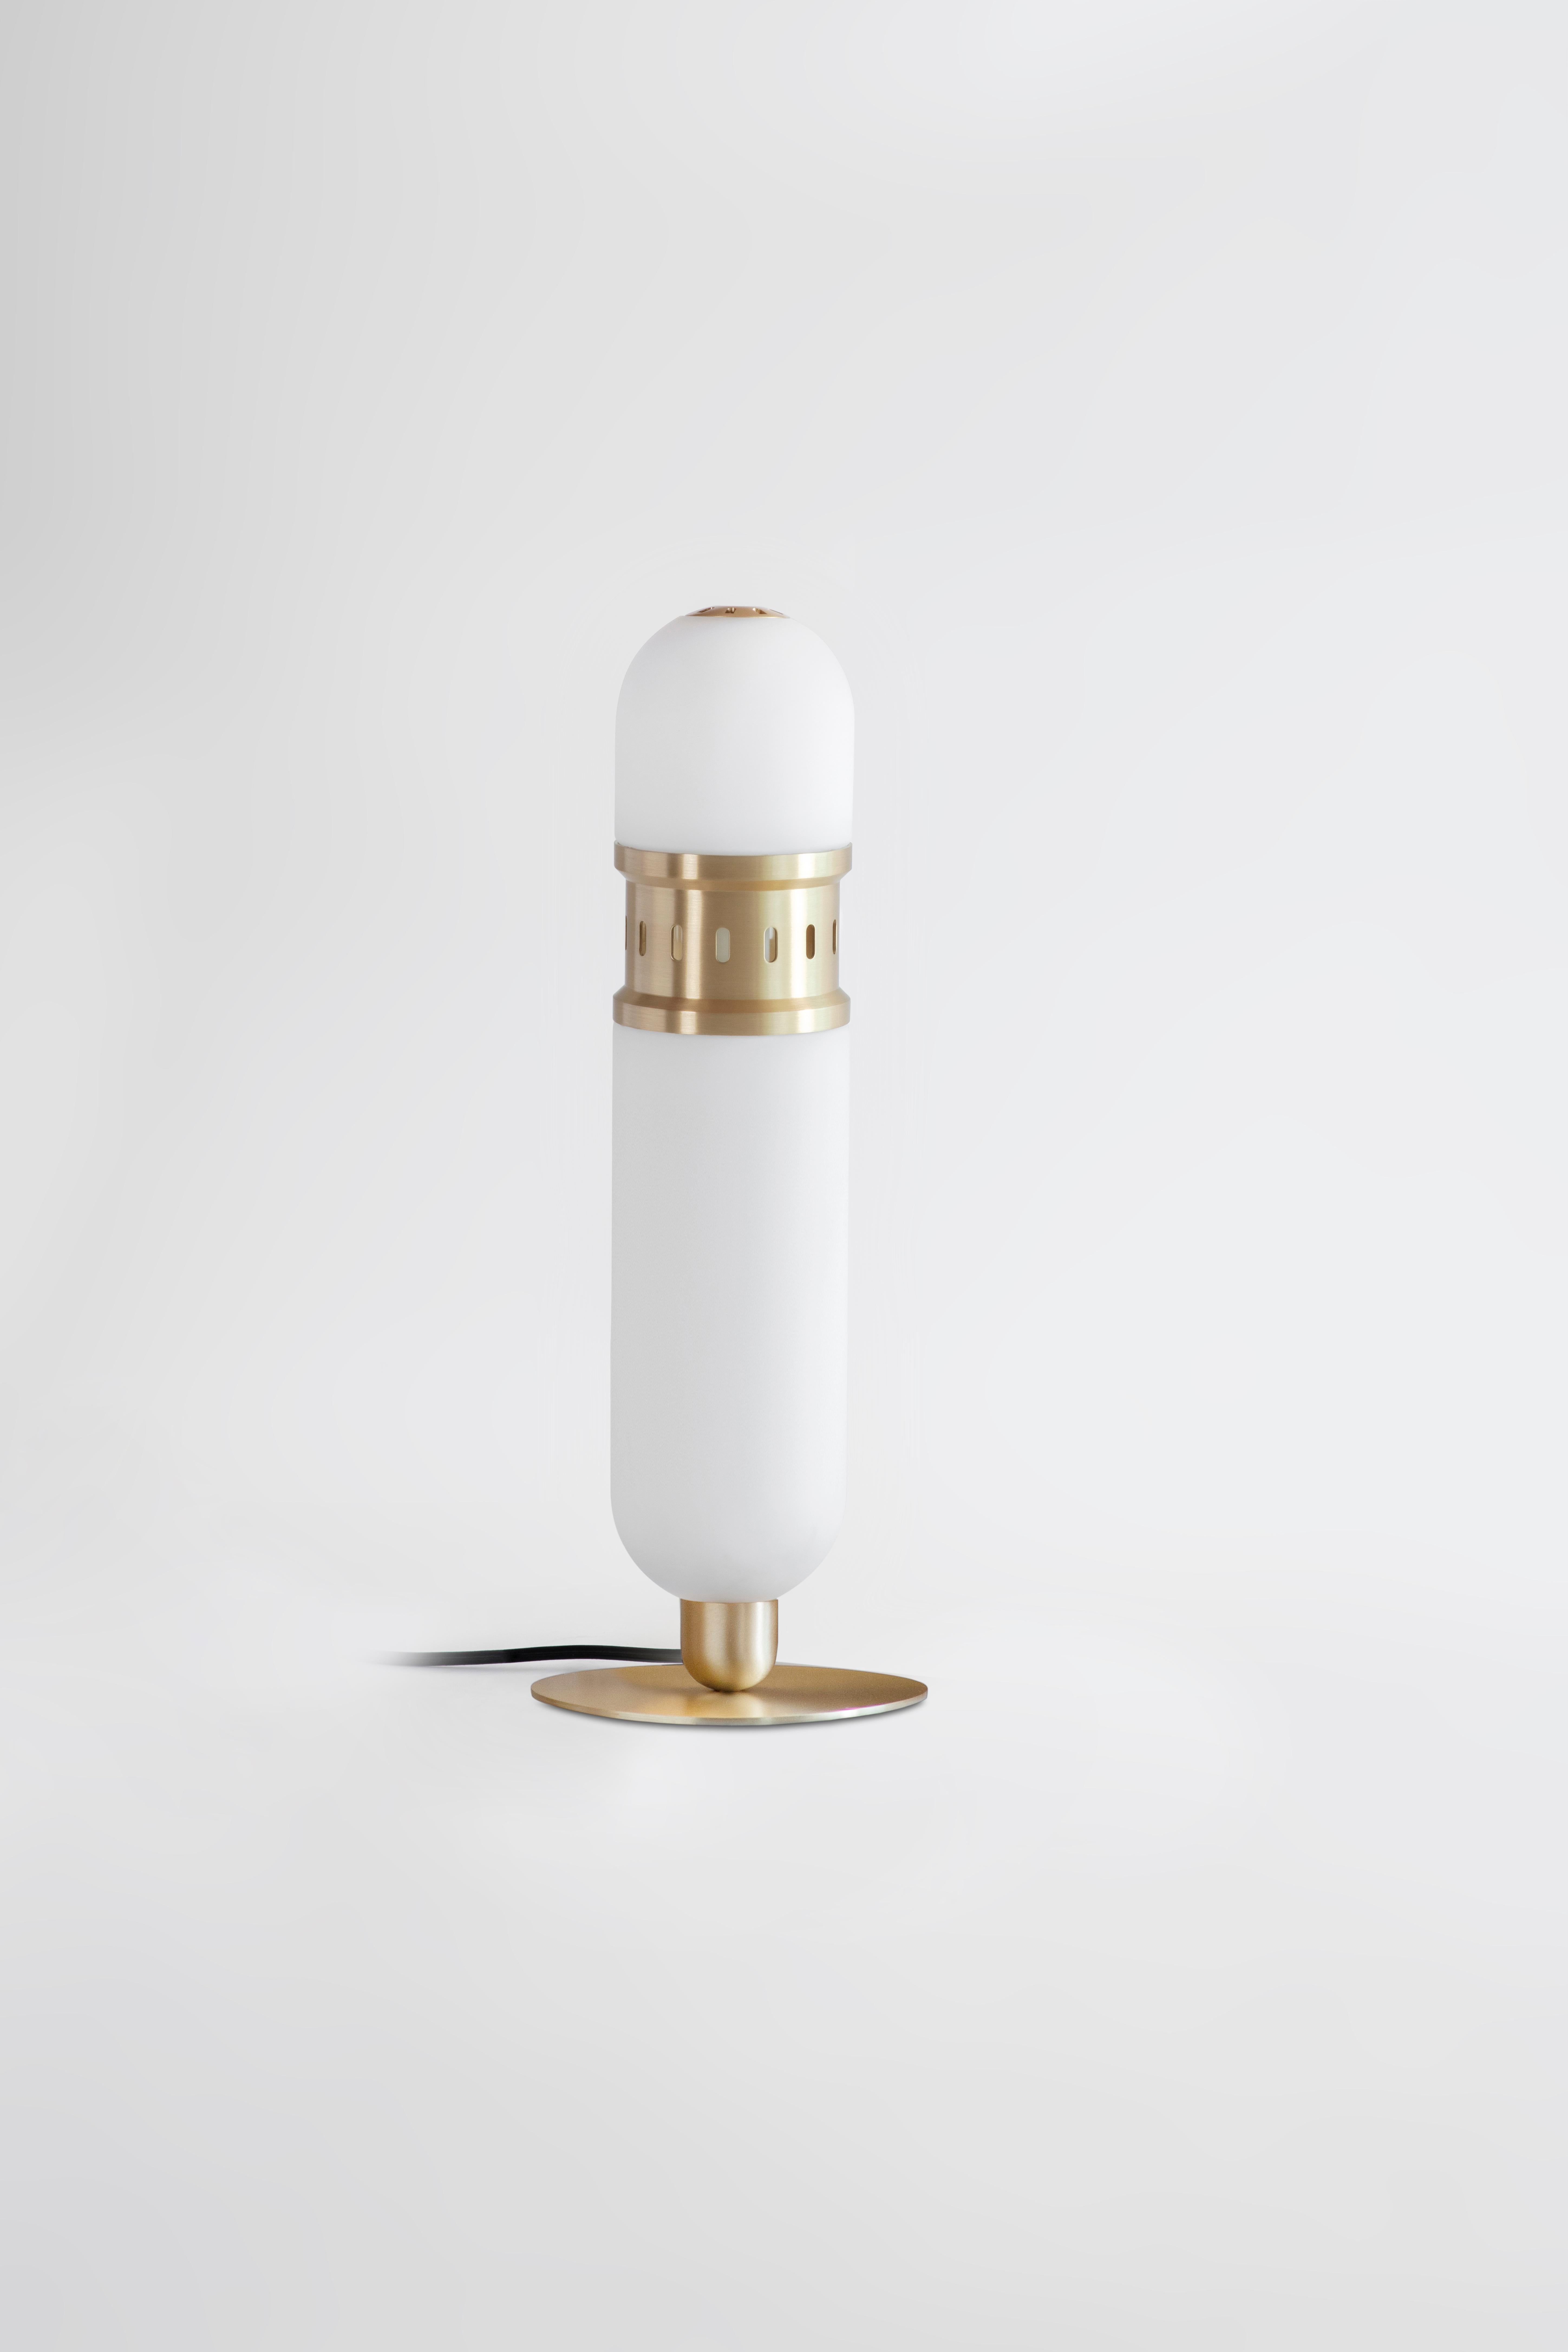 Occulo brass table lamp I by Bert Frank.
Dimensions: 15 x H 46 cm.
Materials: brass, glass.
Available in brushed brass, dark bronze or satin nickel.

All our lamps can be wired according to each country. If sold to the USA it will be wired for